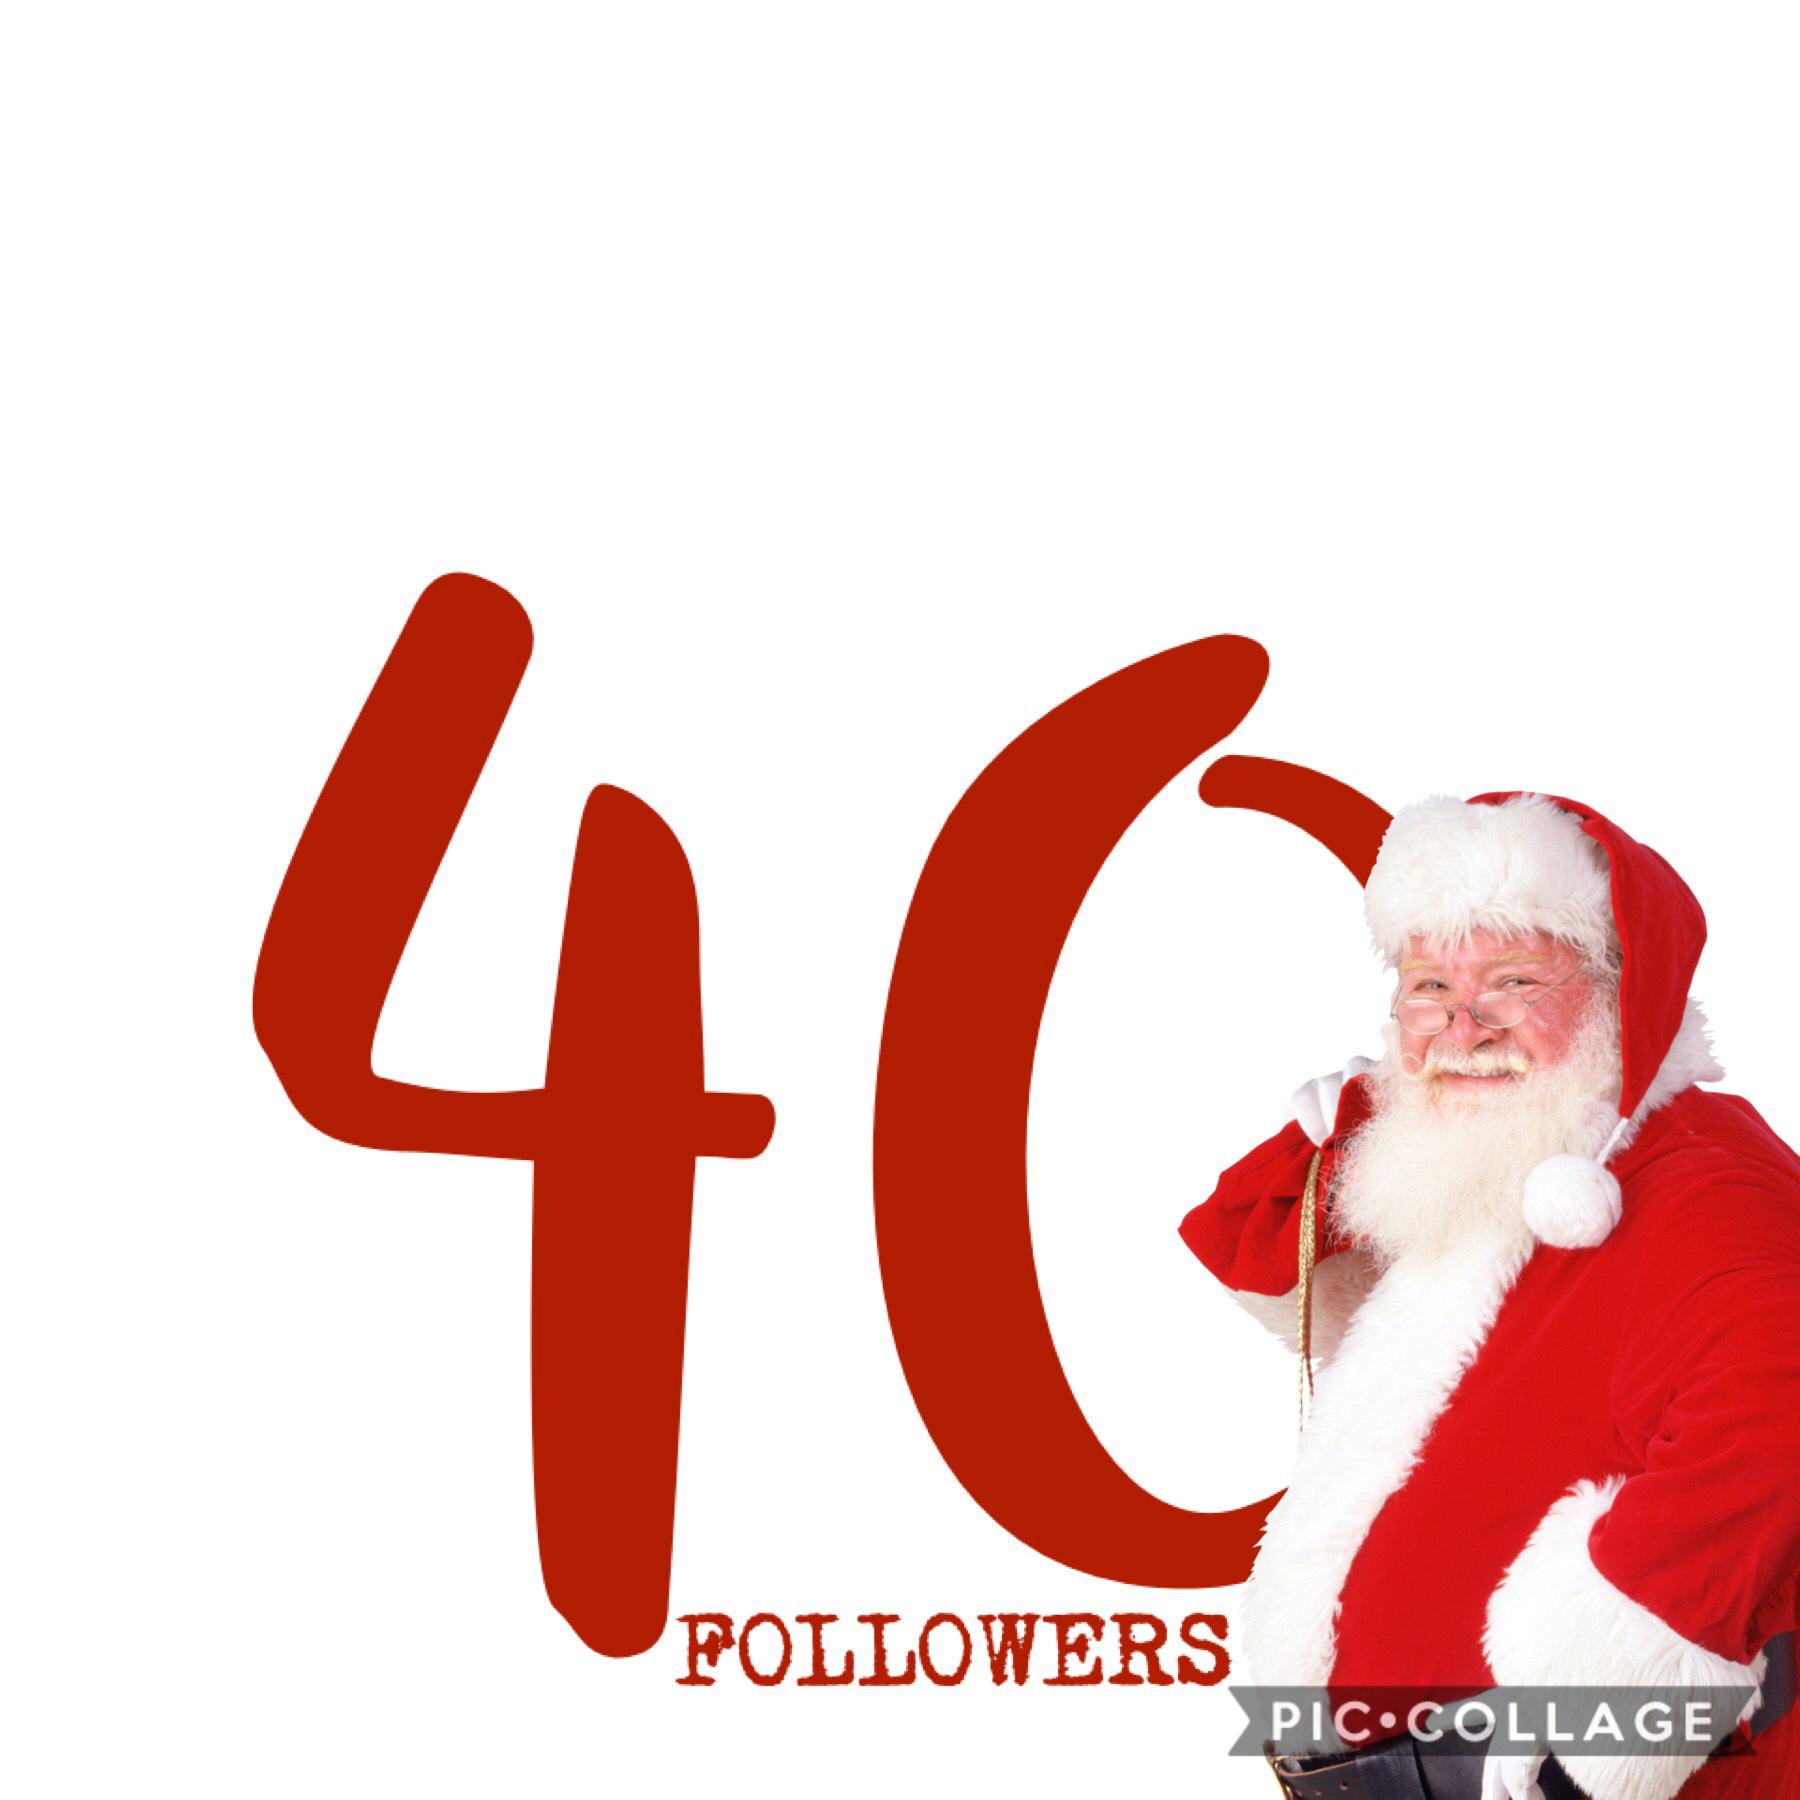 thank you so much for forty followers. It’s amazing I’ve gotten to this point on a small collage account. I’m literally dumbfounded right now. I wish you all the merriest, most meaningful Christmas you’ve ever had. If you don’t celebrate Christmas, happy 